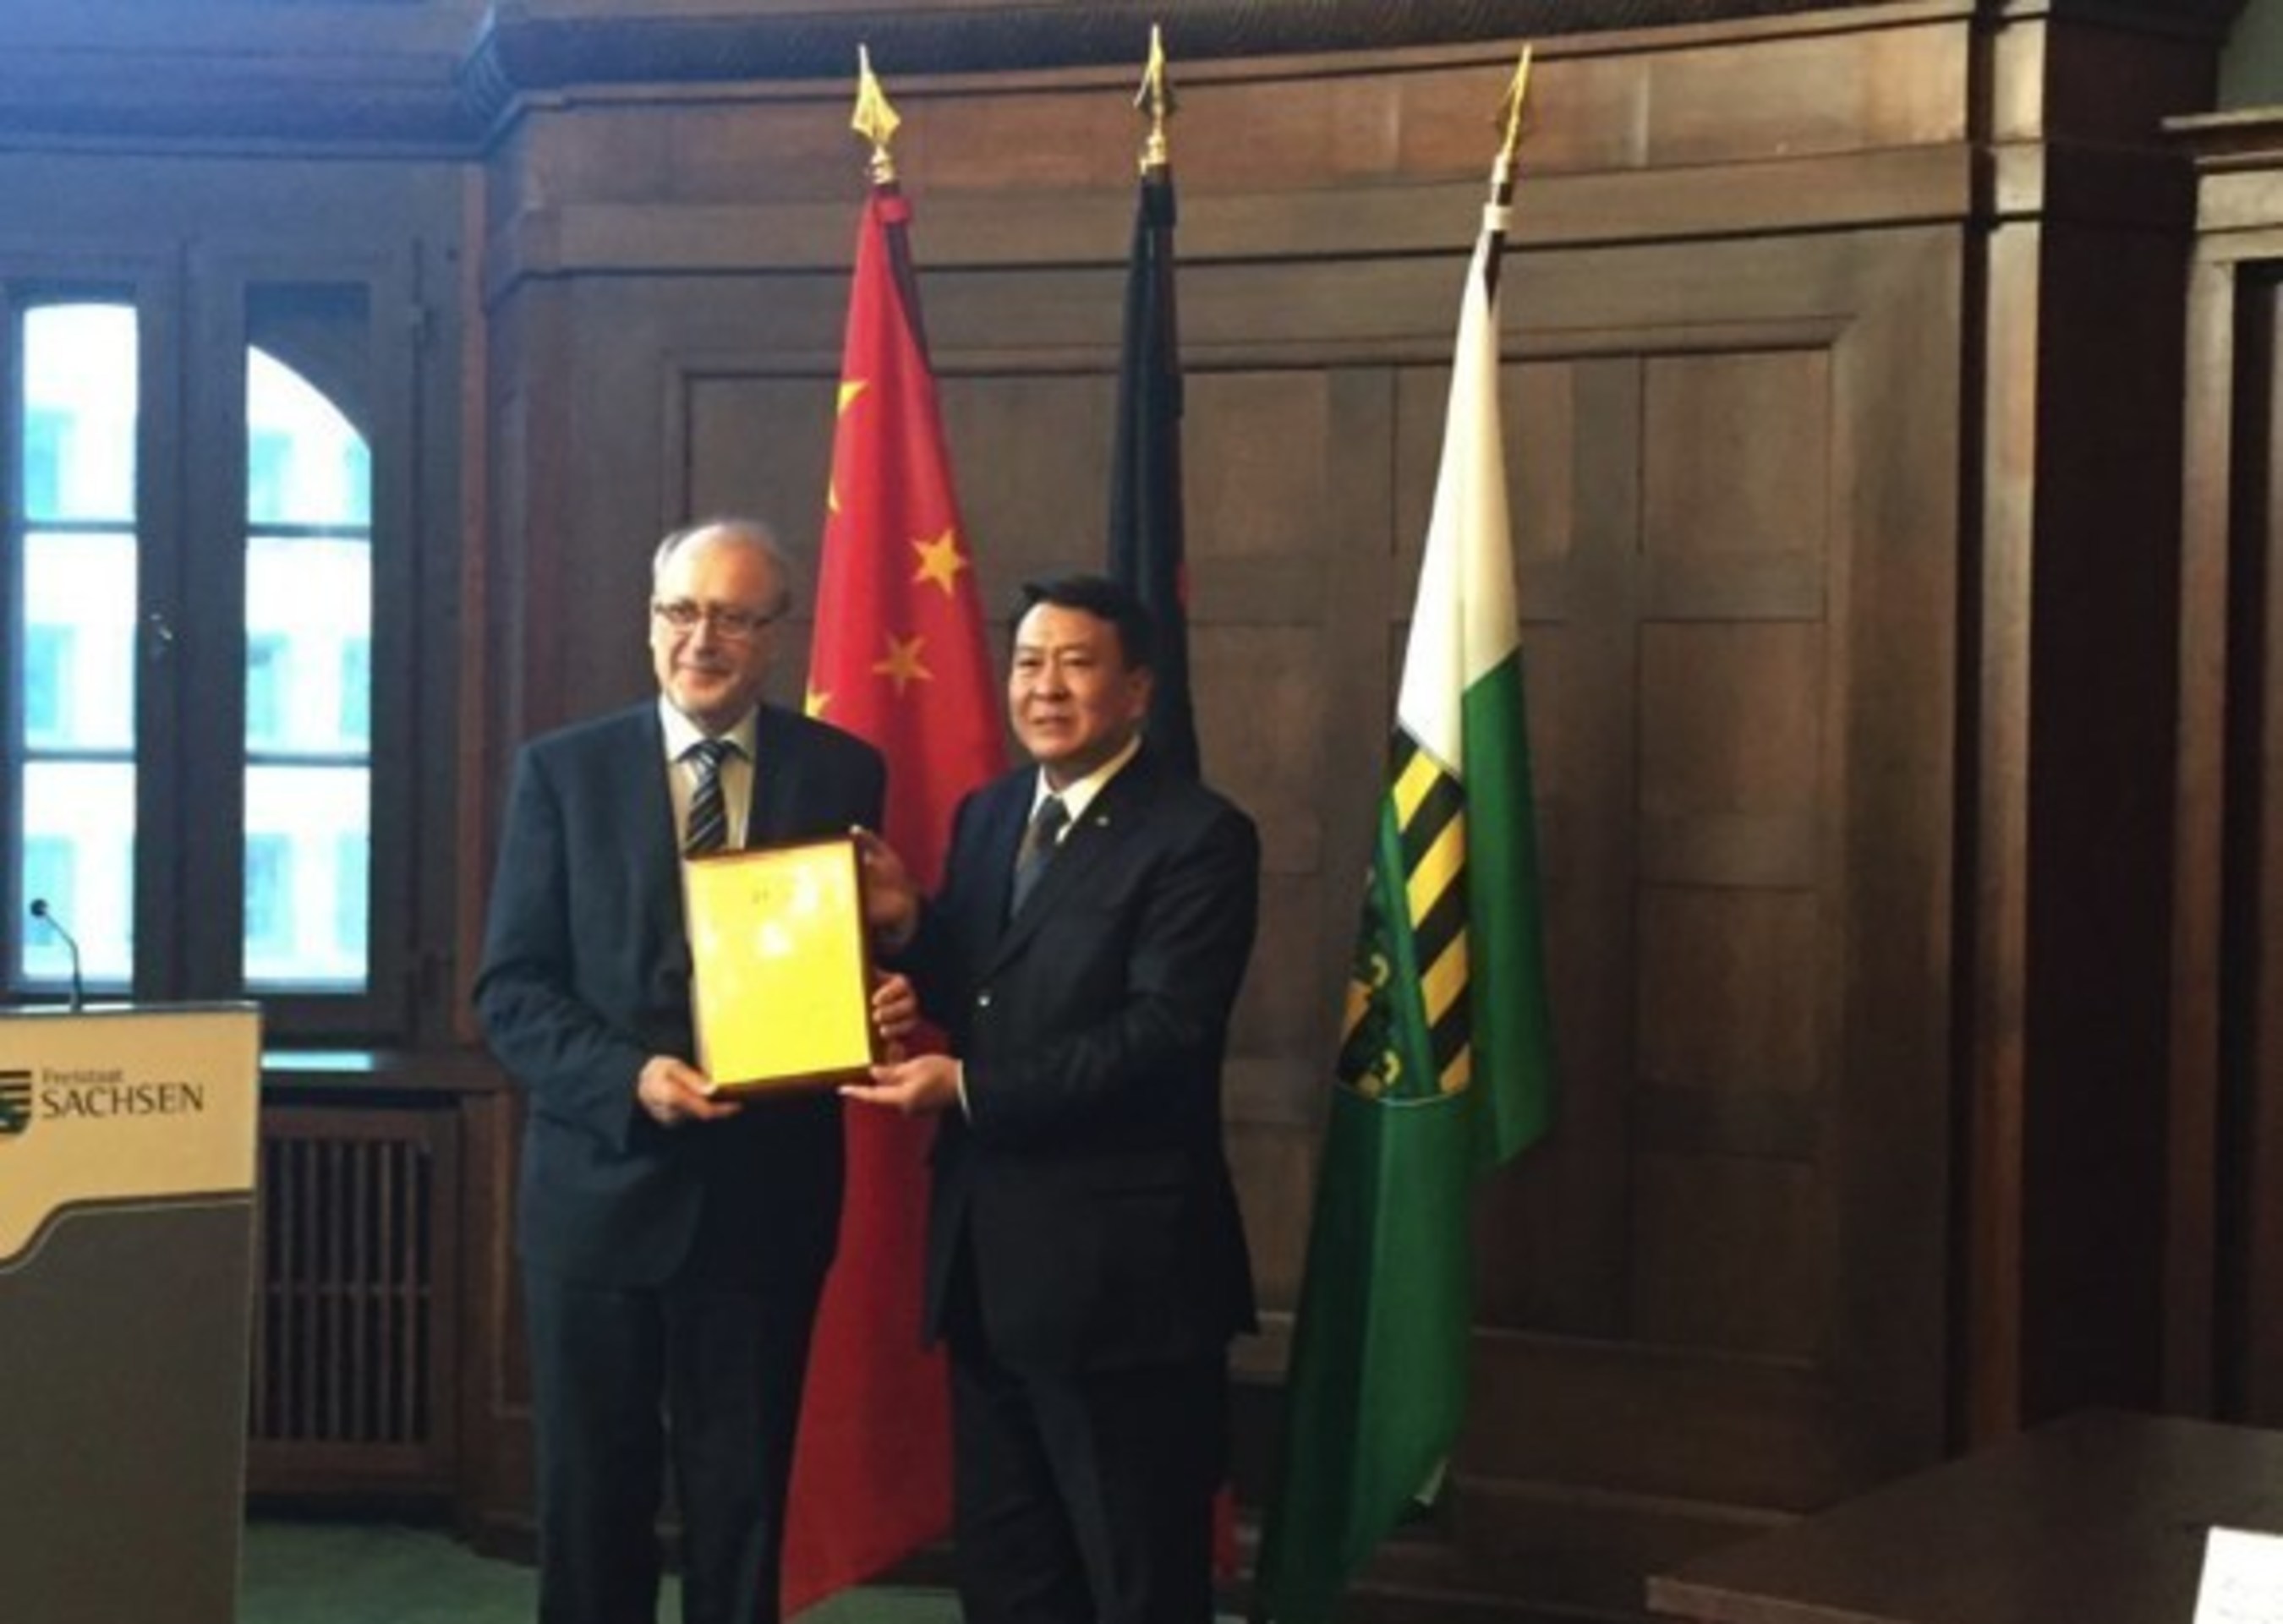 Chairman Xu Heyi is presenting the appointment letter to Academician Hufenbach.